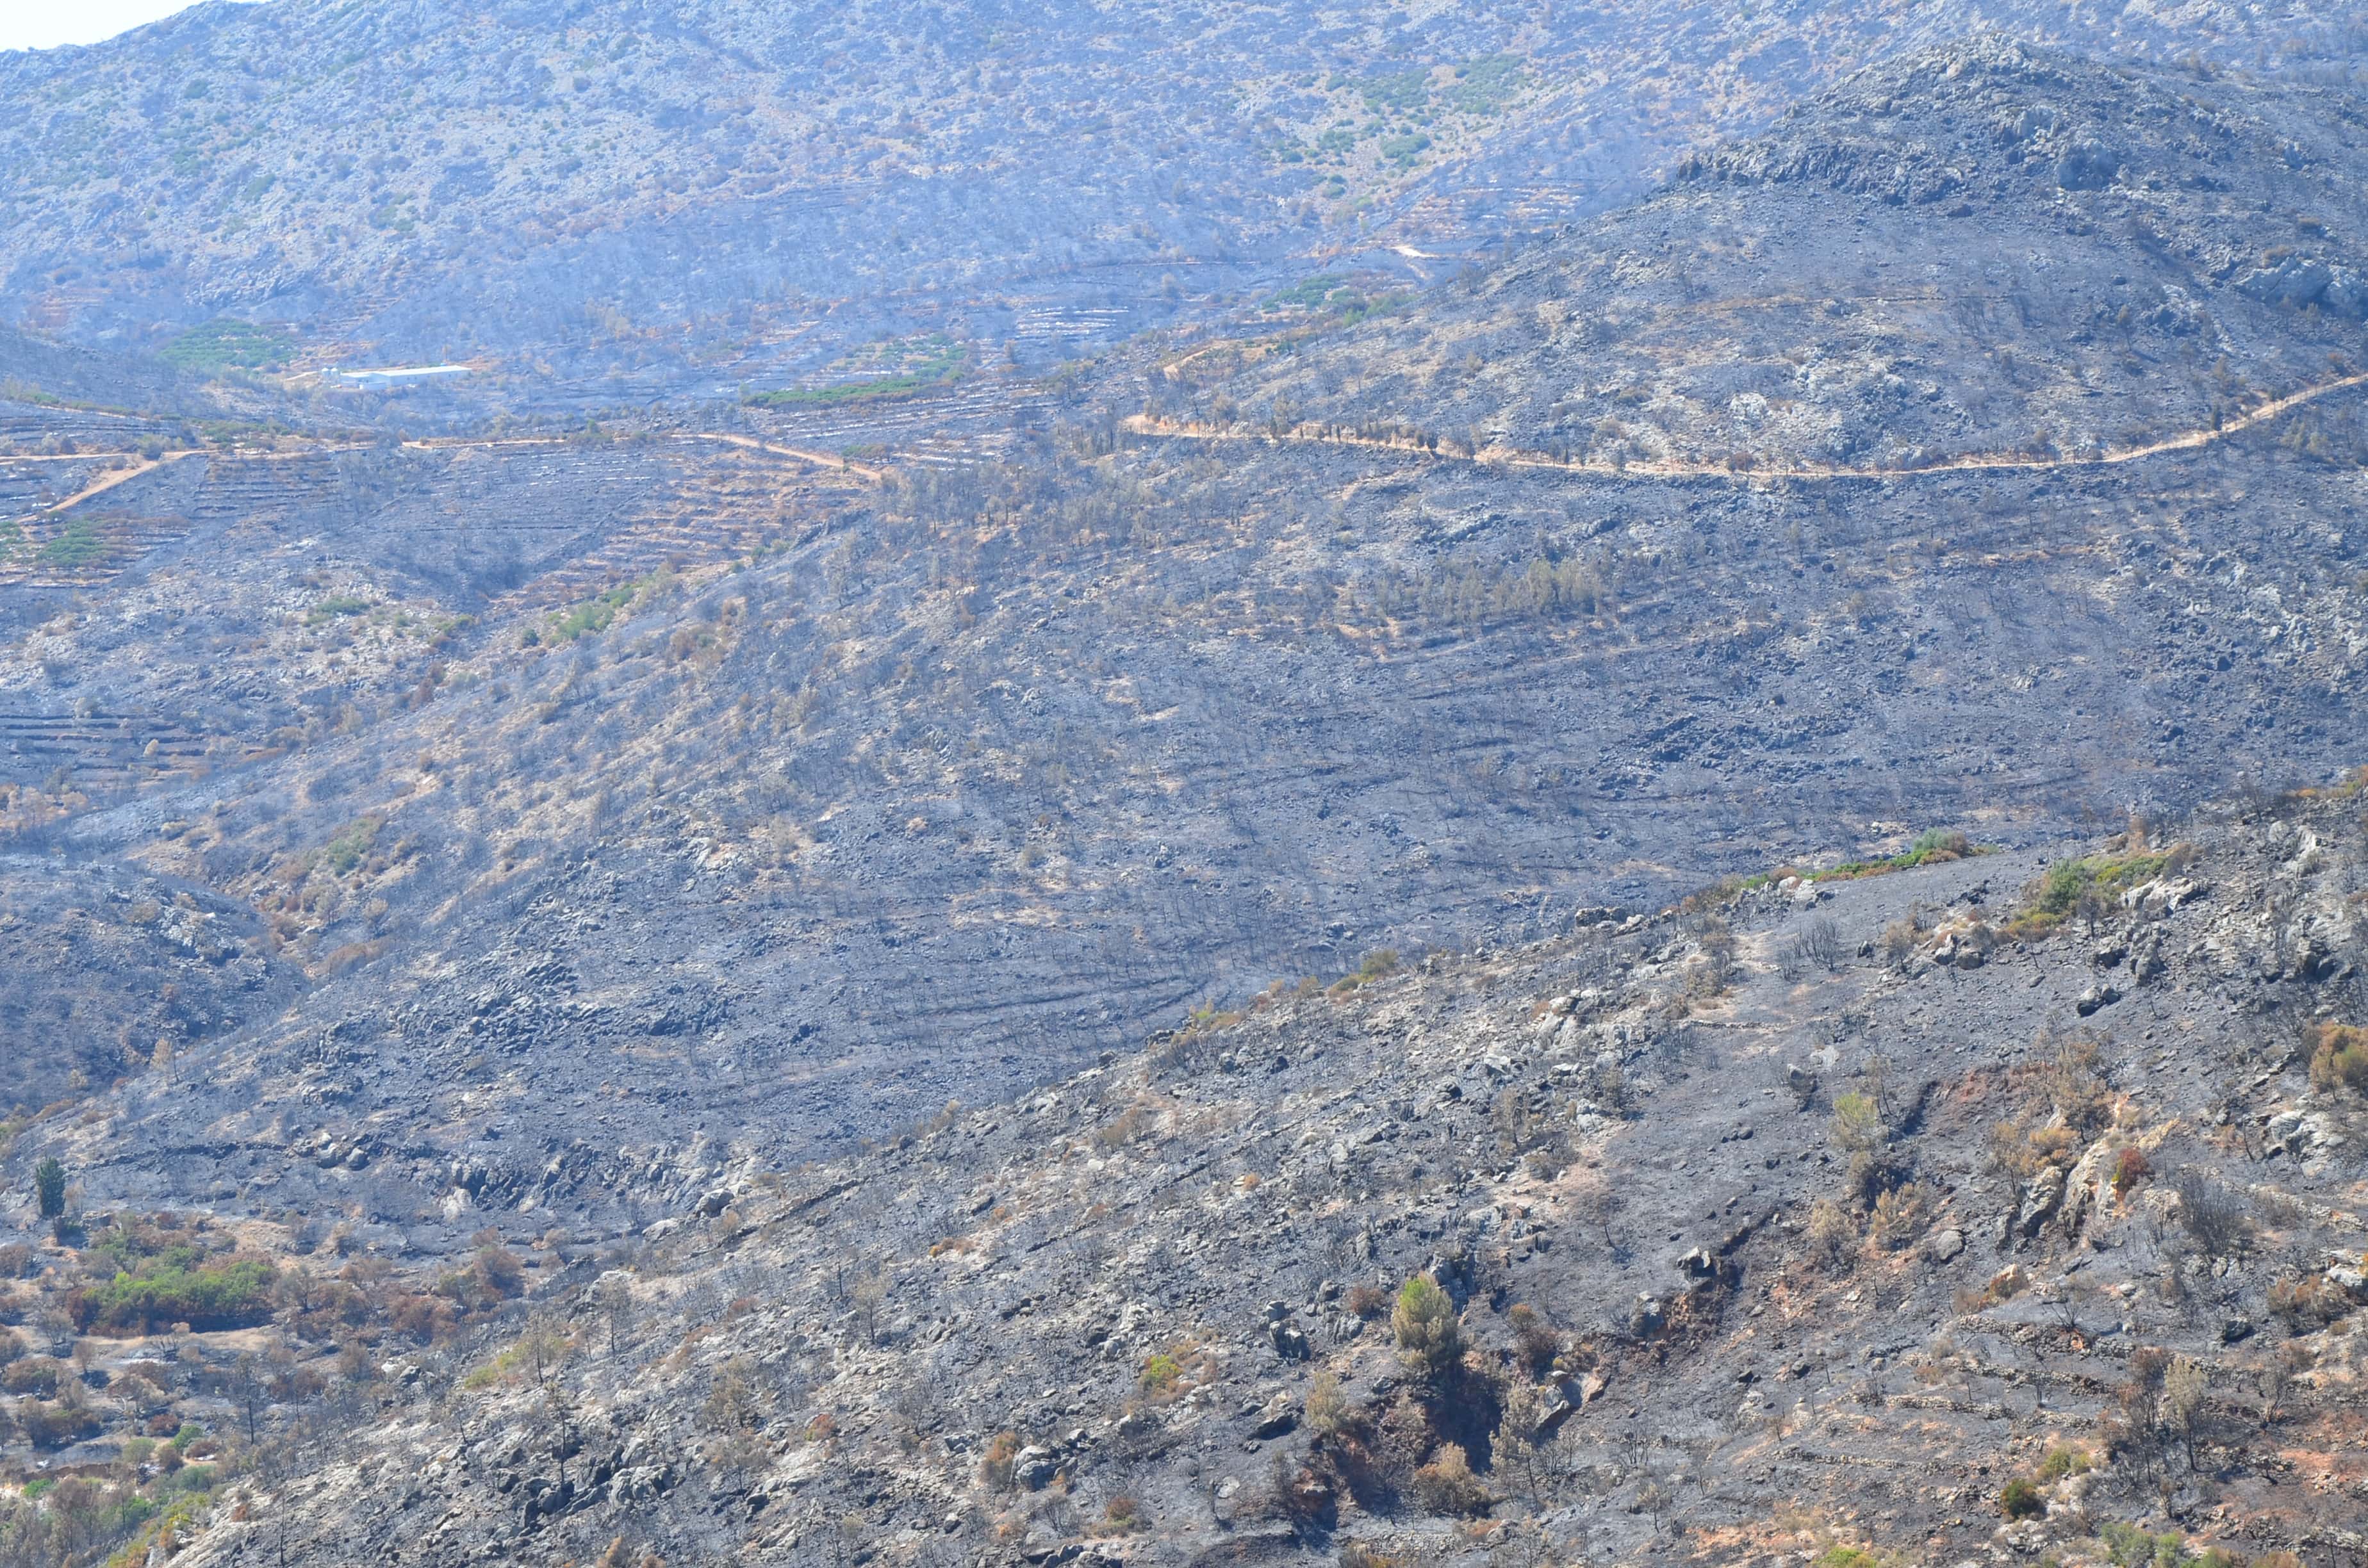 Aftermath of 2012 fires near Tholopotami, Chios, Greece